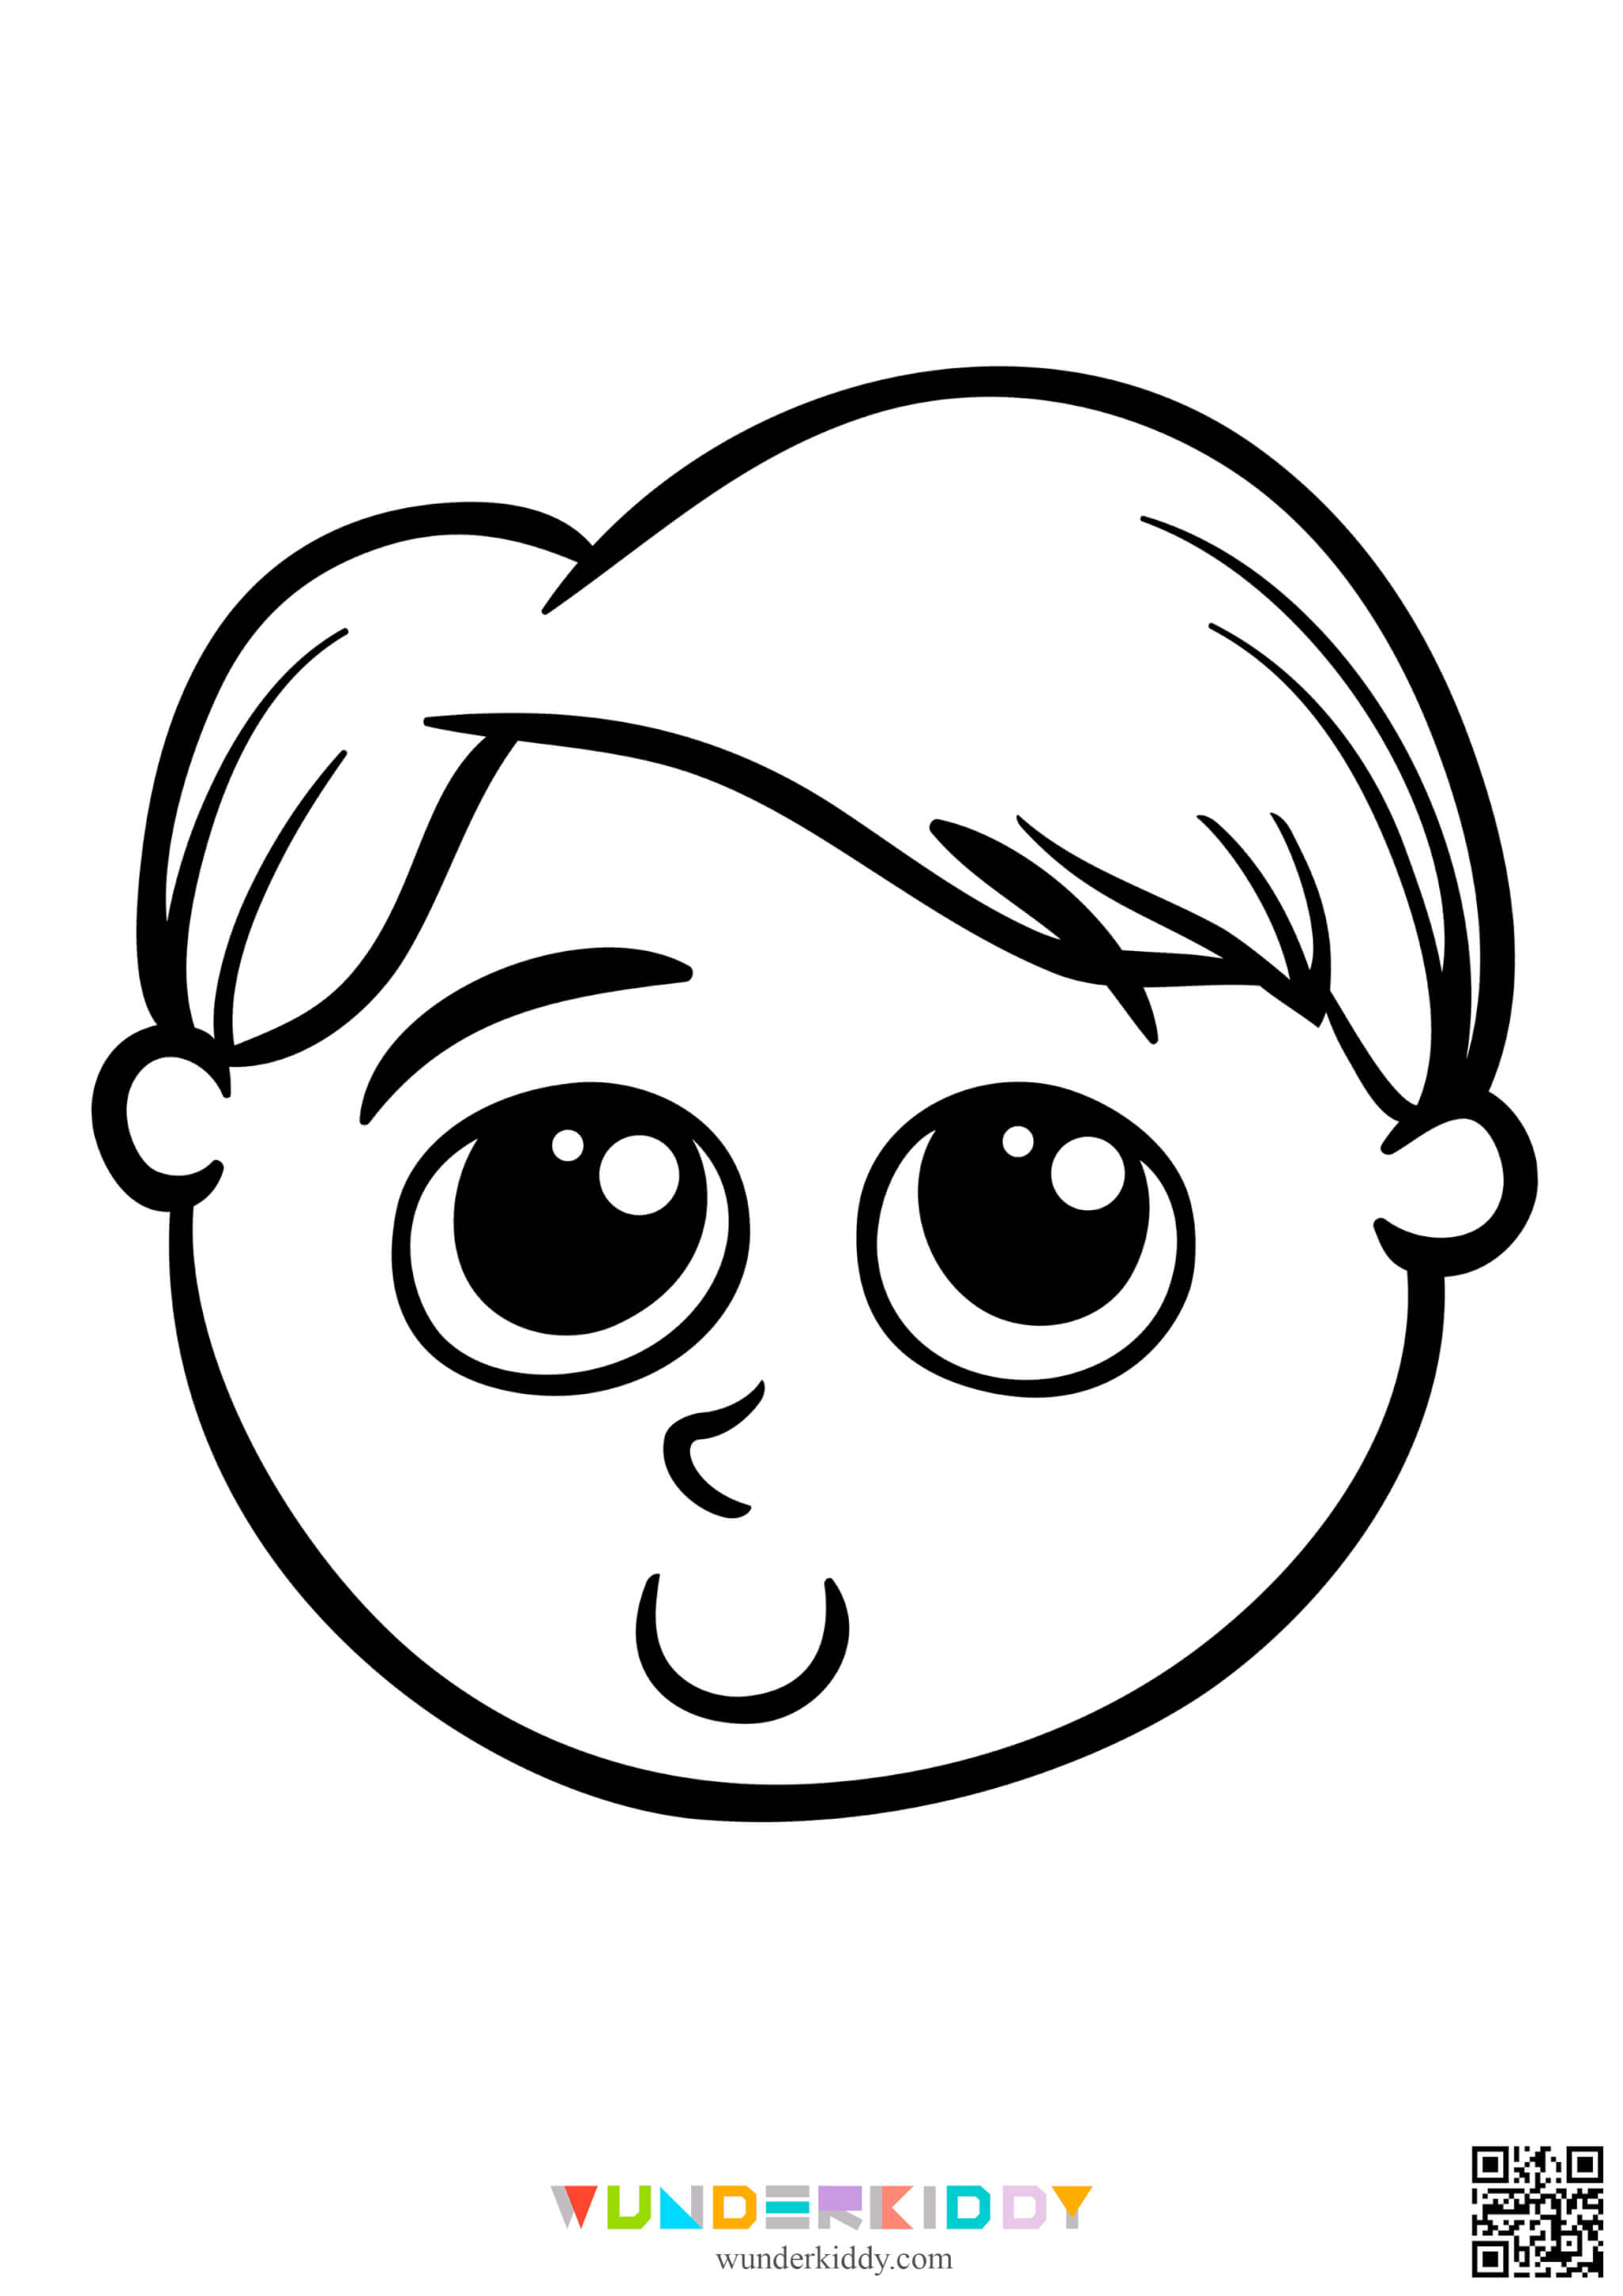 Face Coloring Page - Image 5